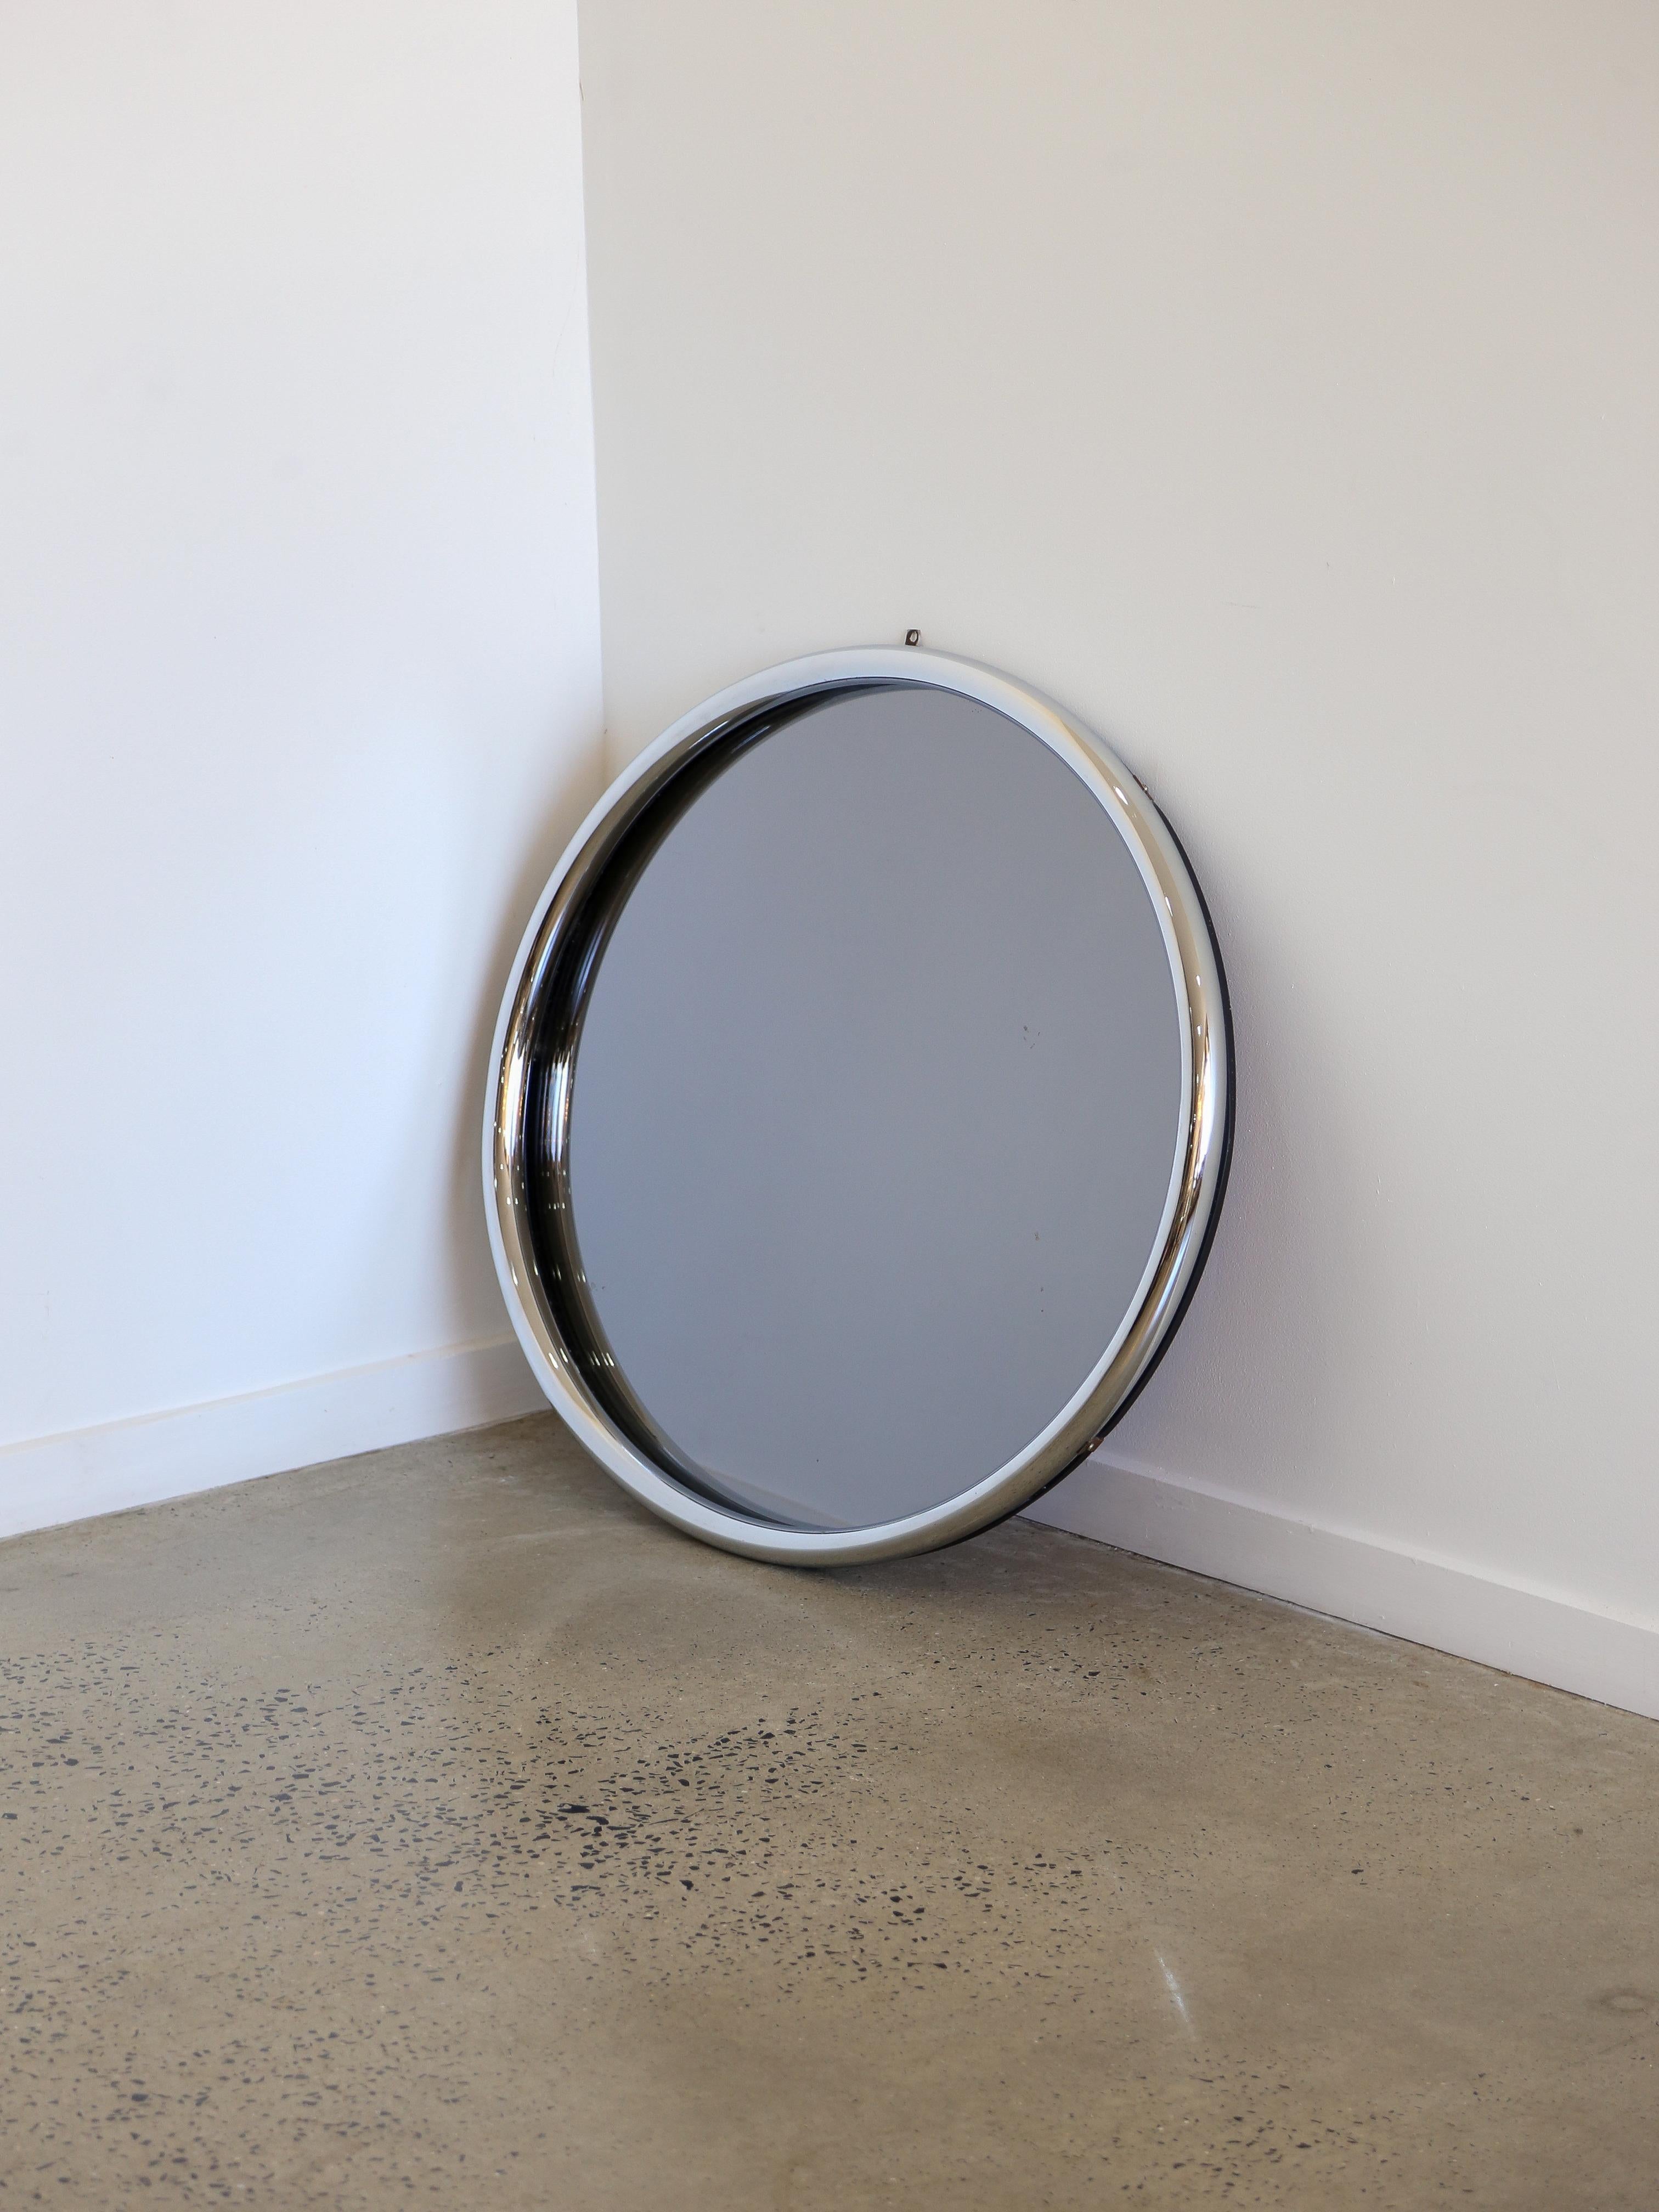 Chrome is a popular choice for mirror frames due to its sleek and shiny appearance, which can add a modern and elegant touch to any room. This mirrors is versatile and can be used in various settings, from bathrooms and bedrooms to living rooms and